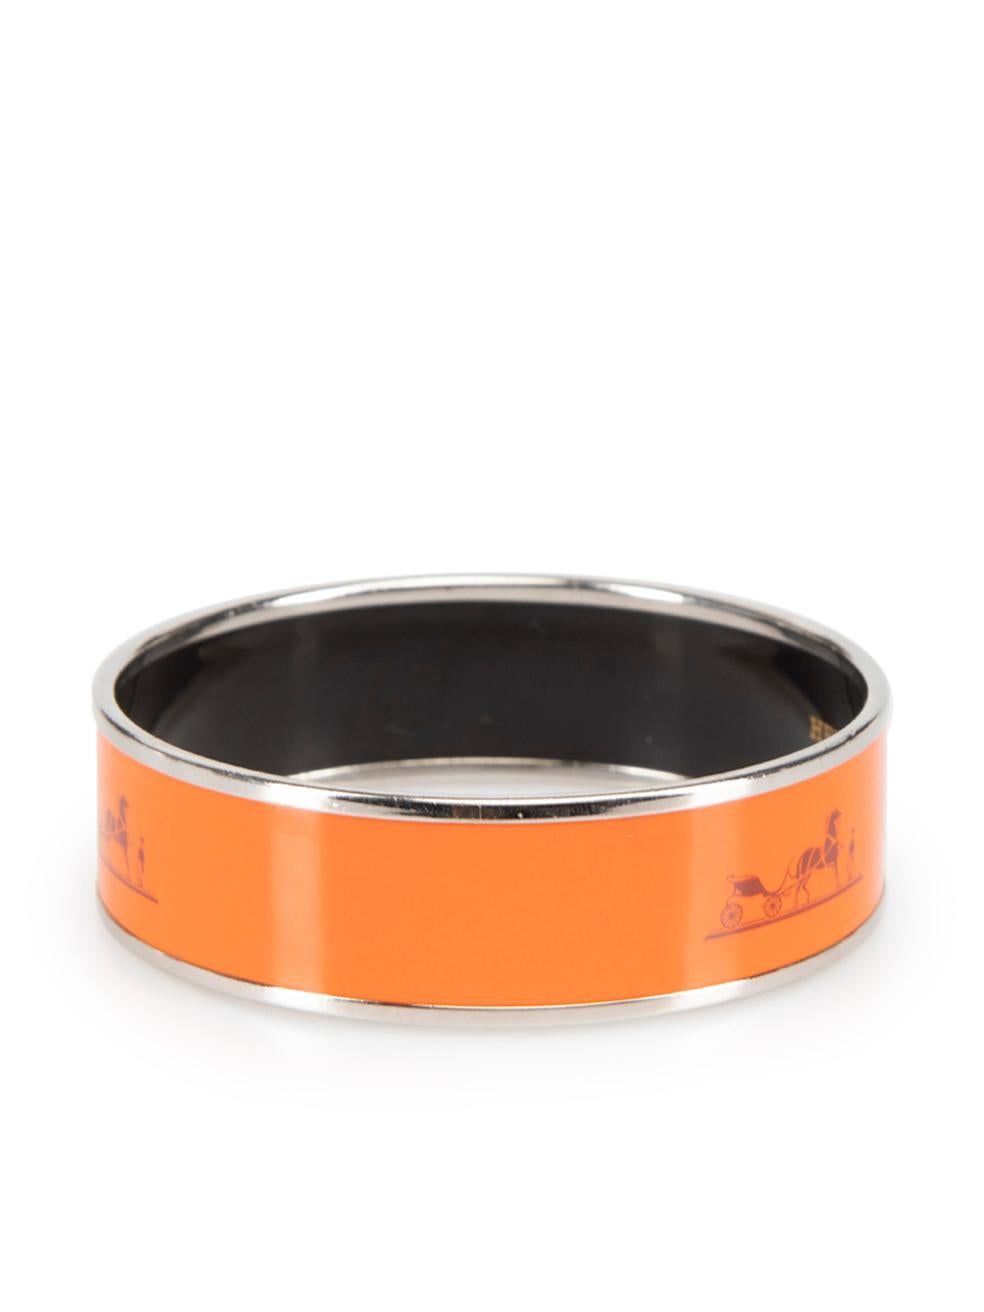 CONDITION is Very good. Minimal wear to bracelet is evident. Slight scratches can be seen to the orange finish on this used Hermés designer resale item. This item comes with original box and dust bag. 
 
 Details
  Orange
 Metal
 Bracelet
 Comes